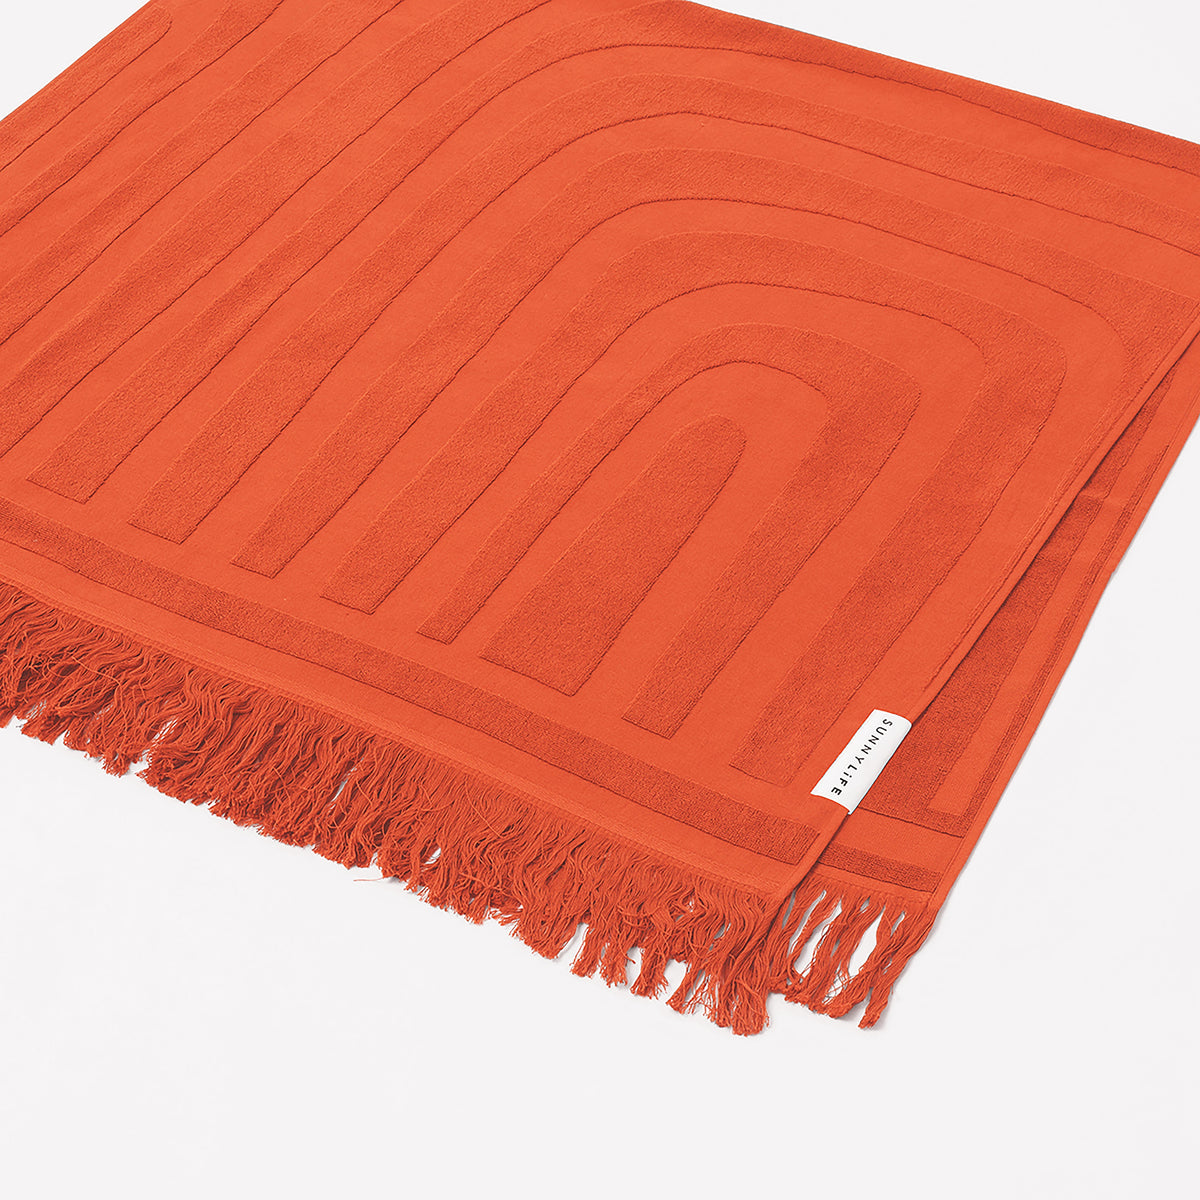 Sunnylife luxe beach towel in terracotta red orange with abstract detail, a summer pop up exclusive online only at Koy Resort. 